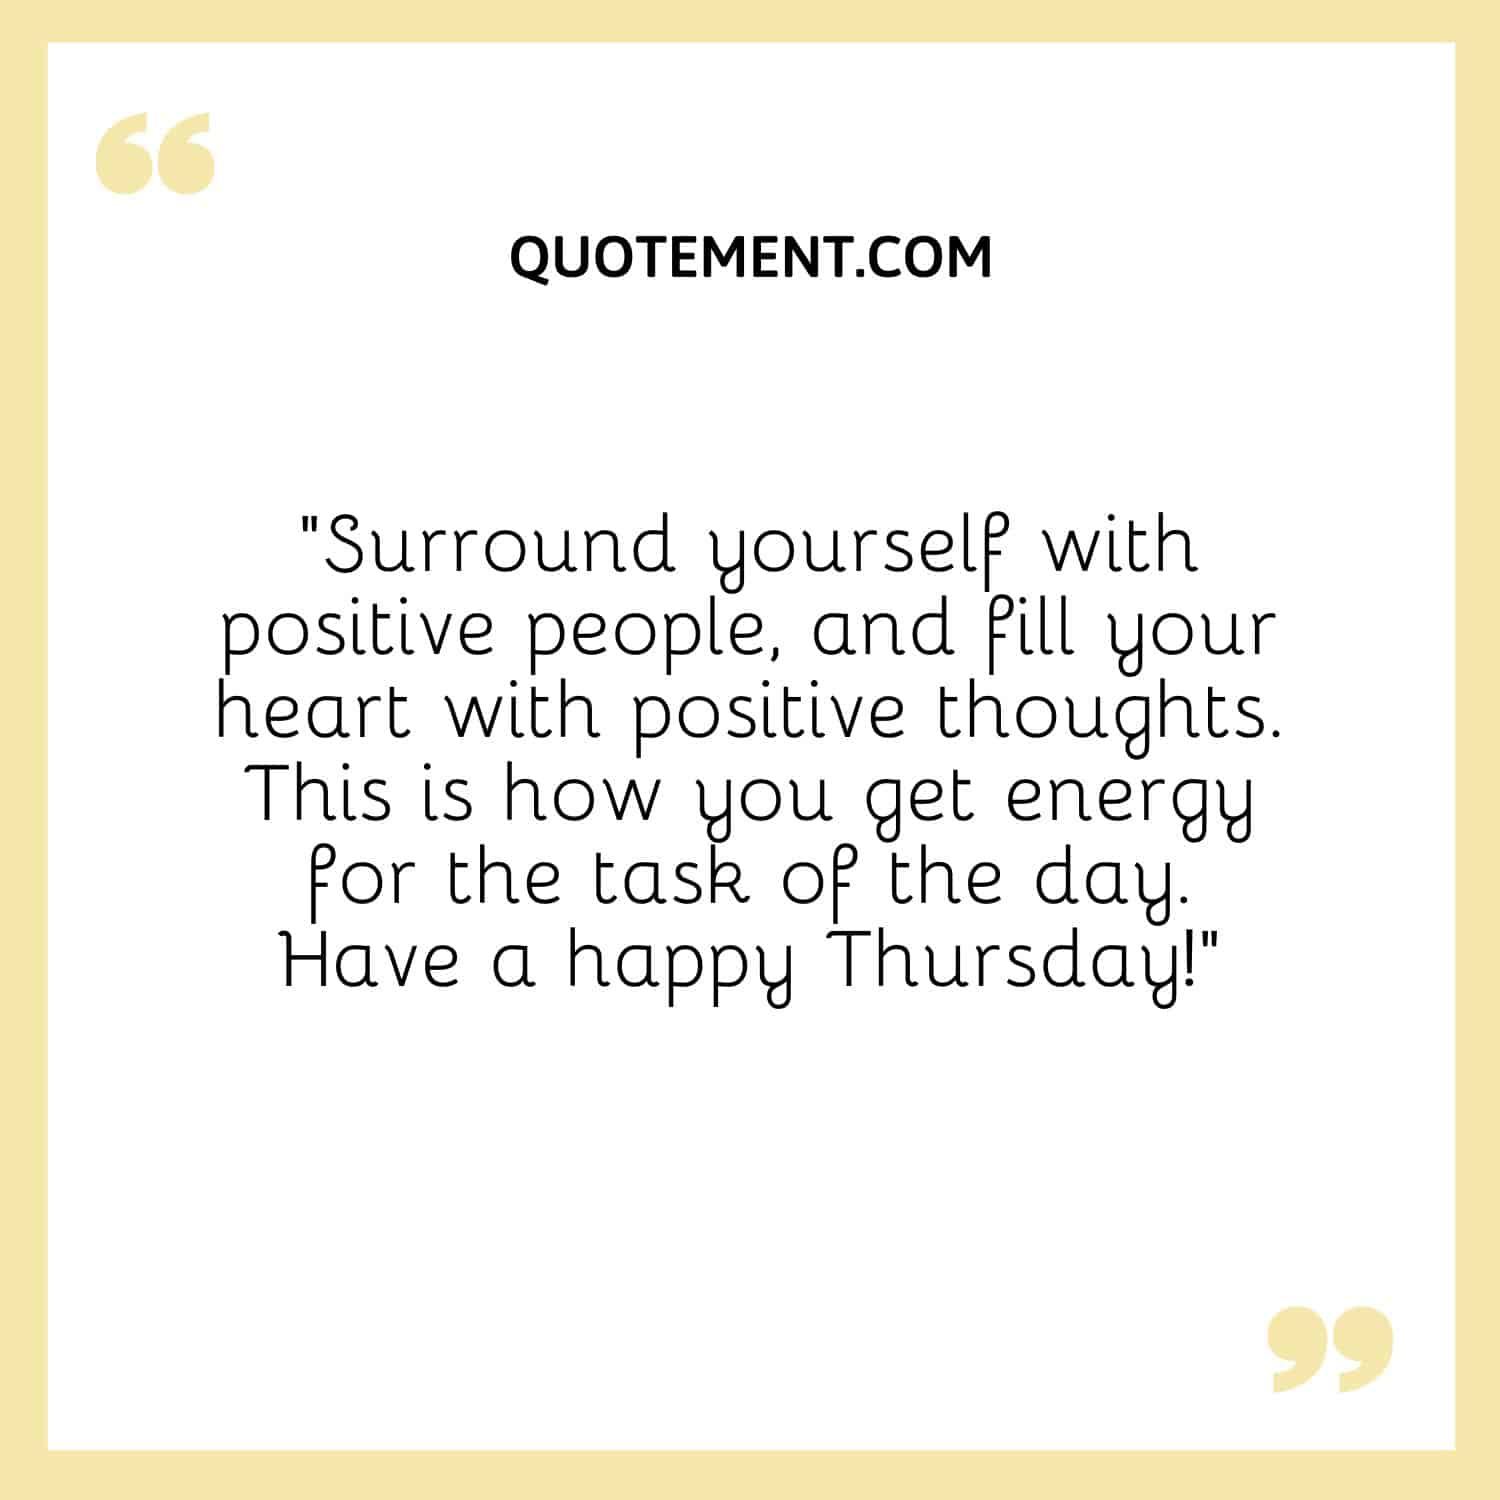 “Surround yourself with positive people, and fill your heart with positive thoughts. This is how you get energy for the task of the day. Have a happy Thursday!”